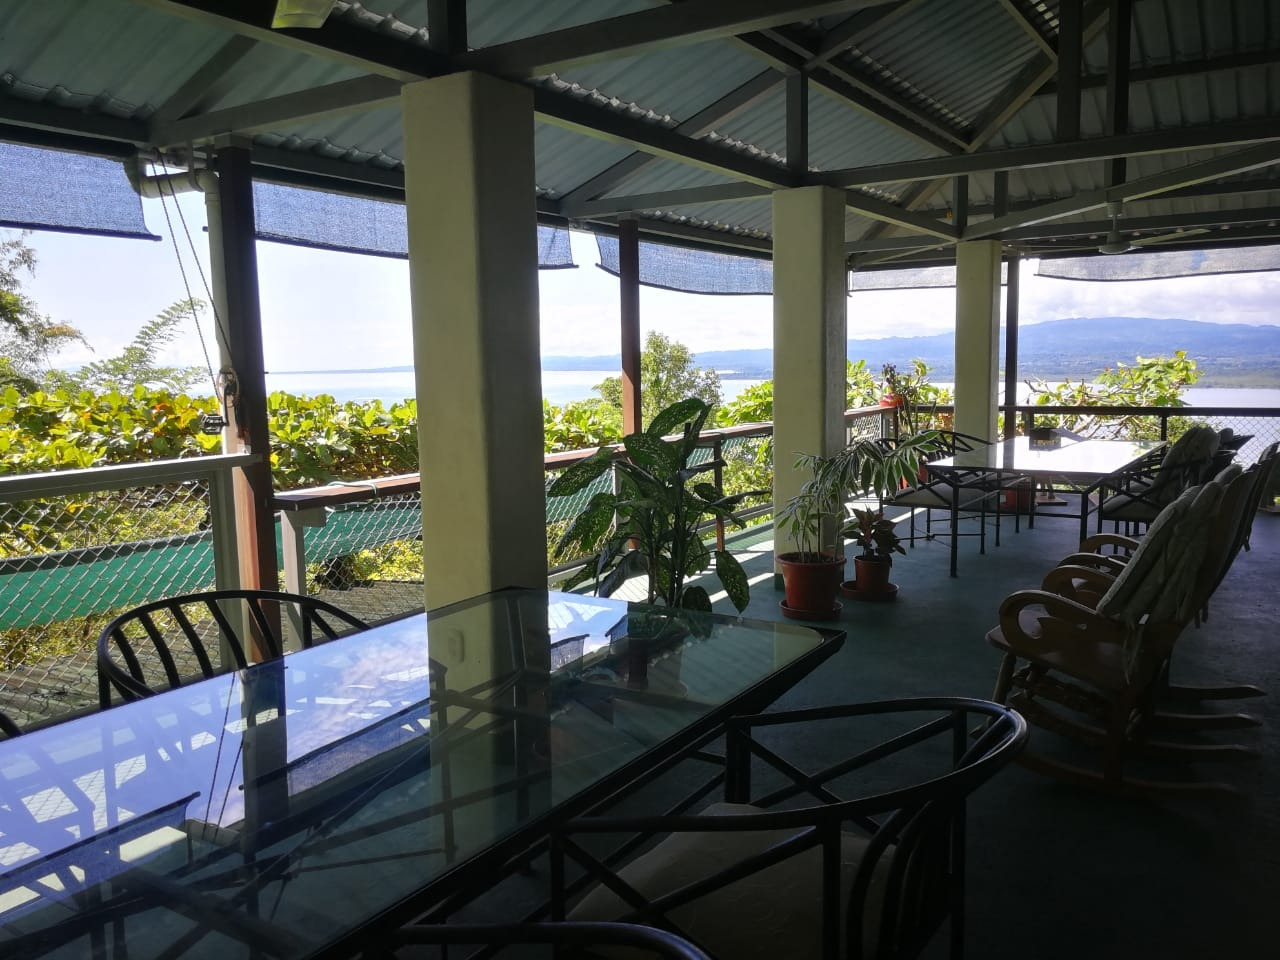 The Ocean view of the Golfo Dulce, from an Osa Peninsula House located on the Highlands